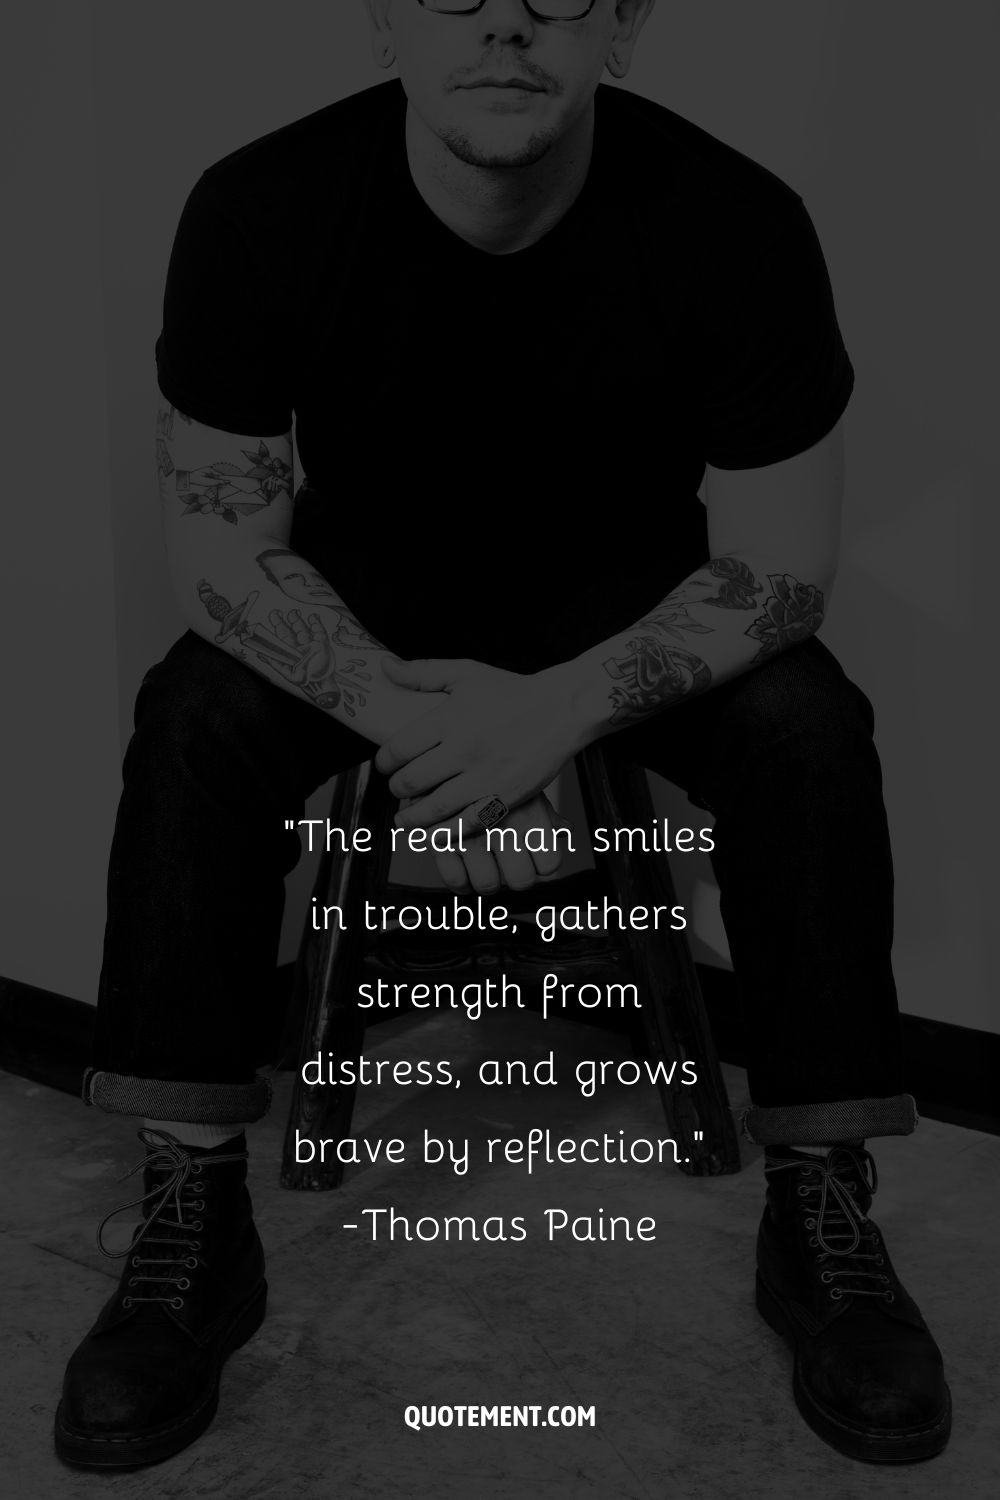 tattooed guy representing top inspirational quote for men